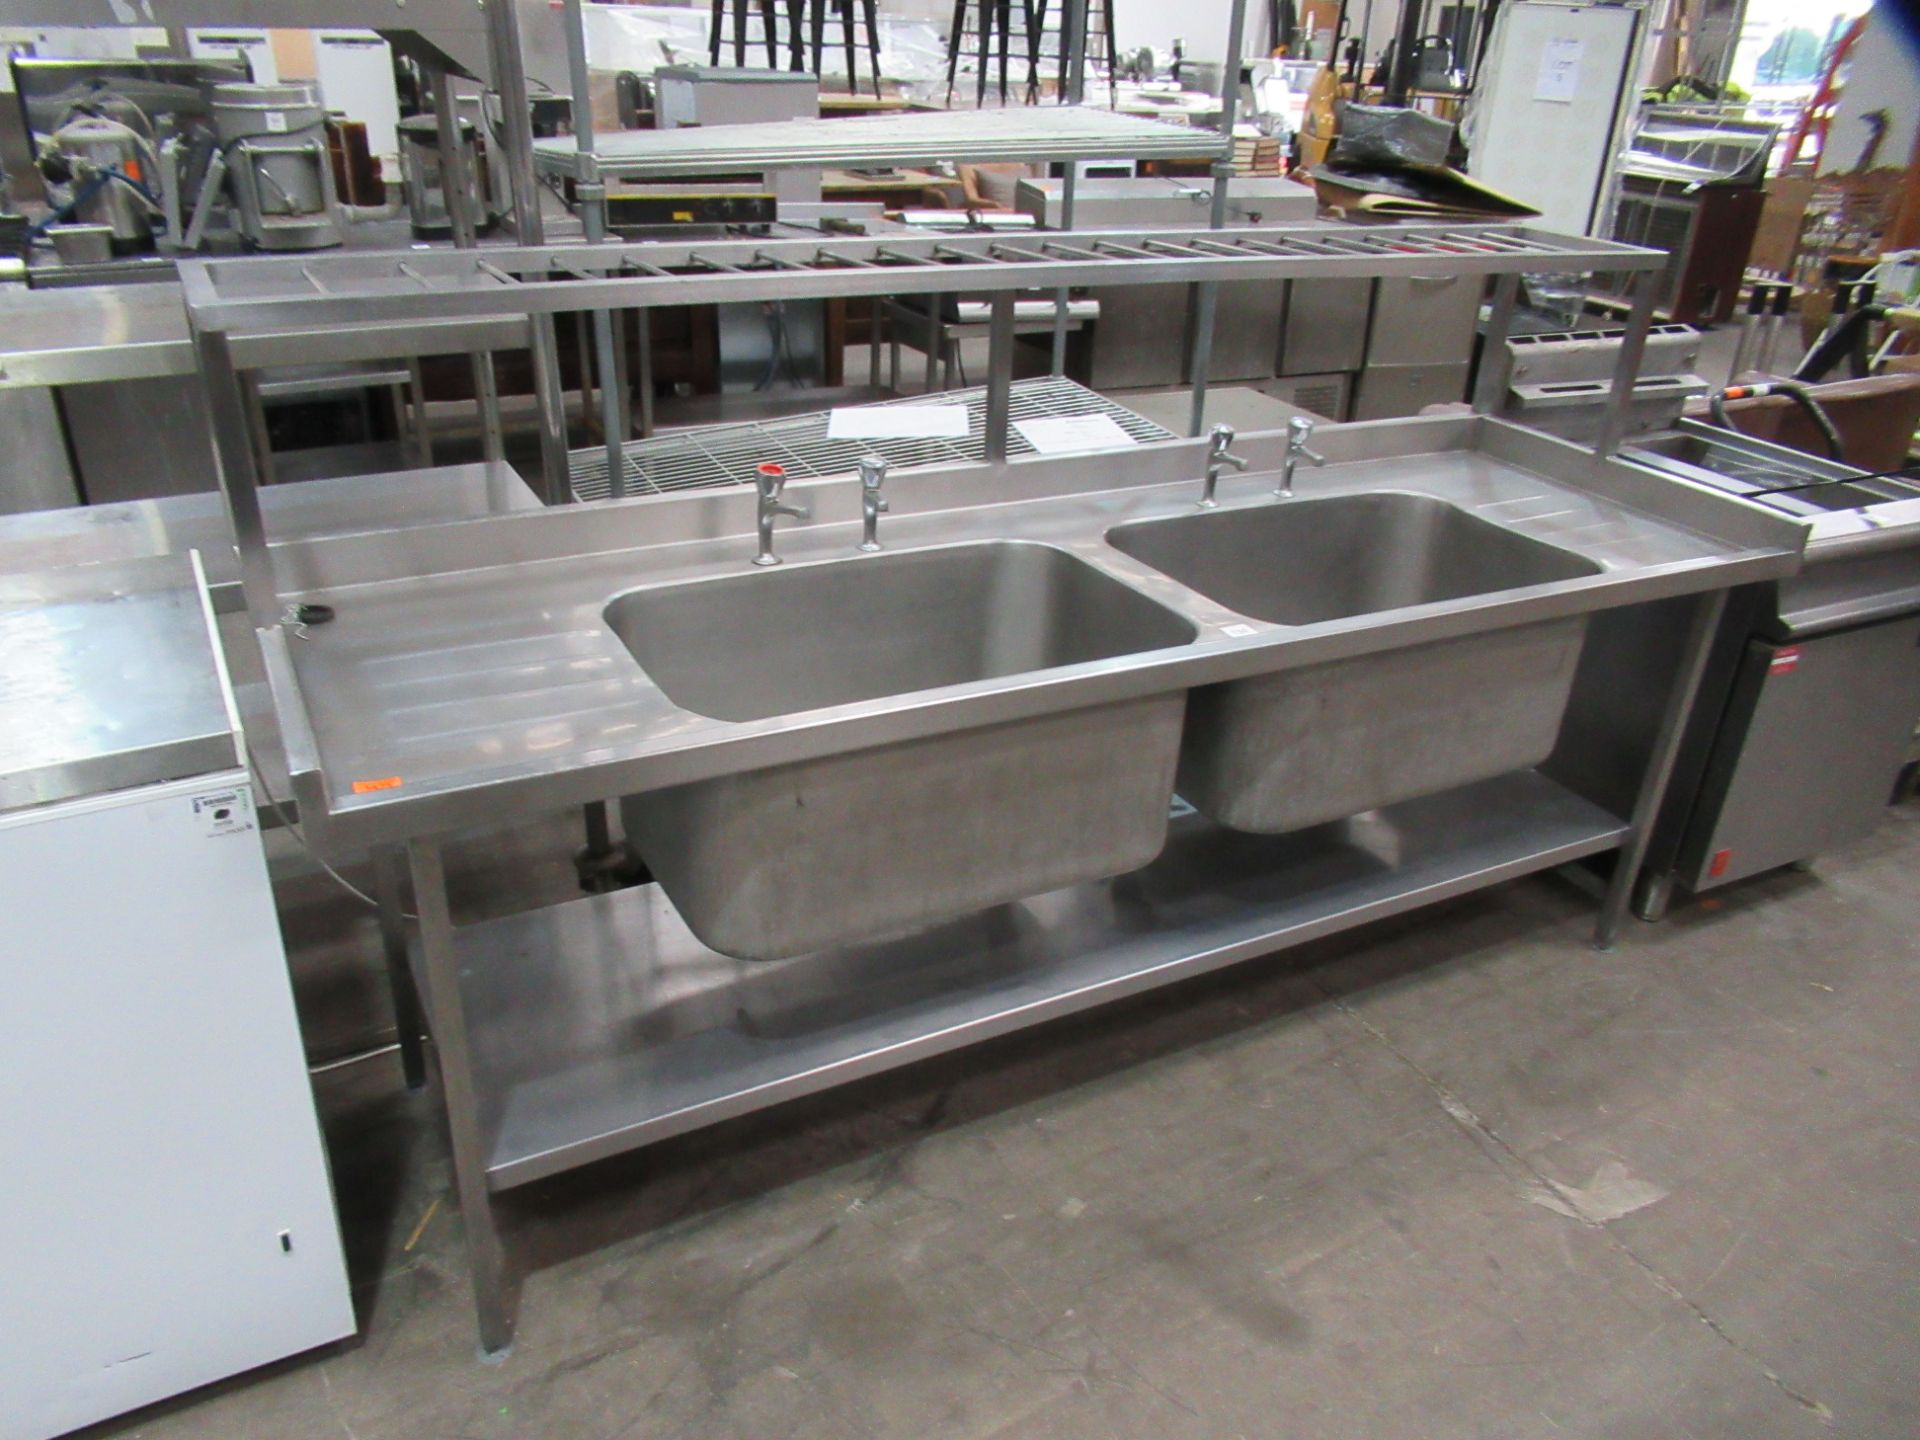 Large Stainless Steel Double Basin Sink Unit With Welded Rack & Under Tier